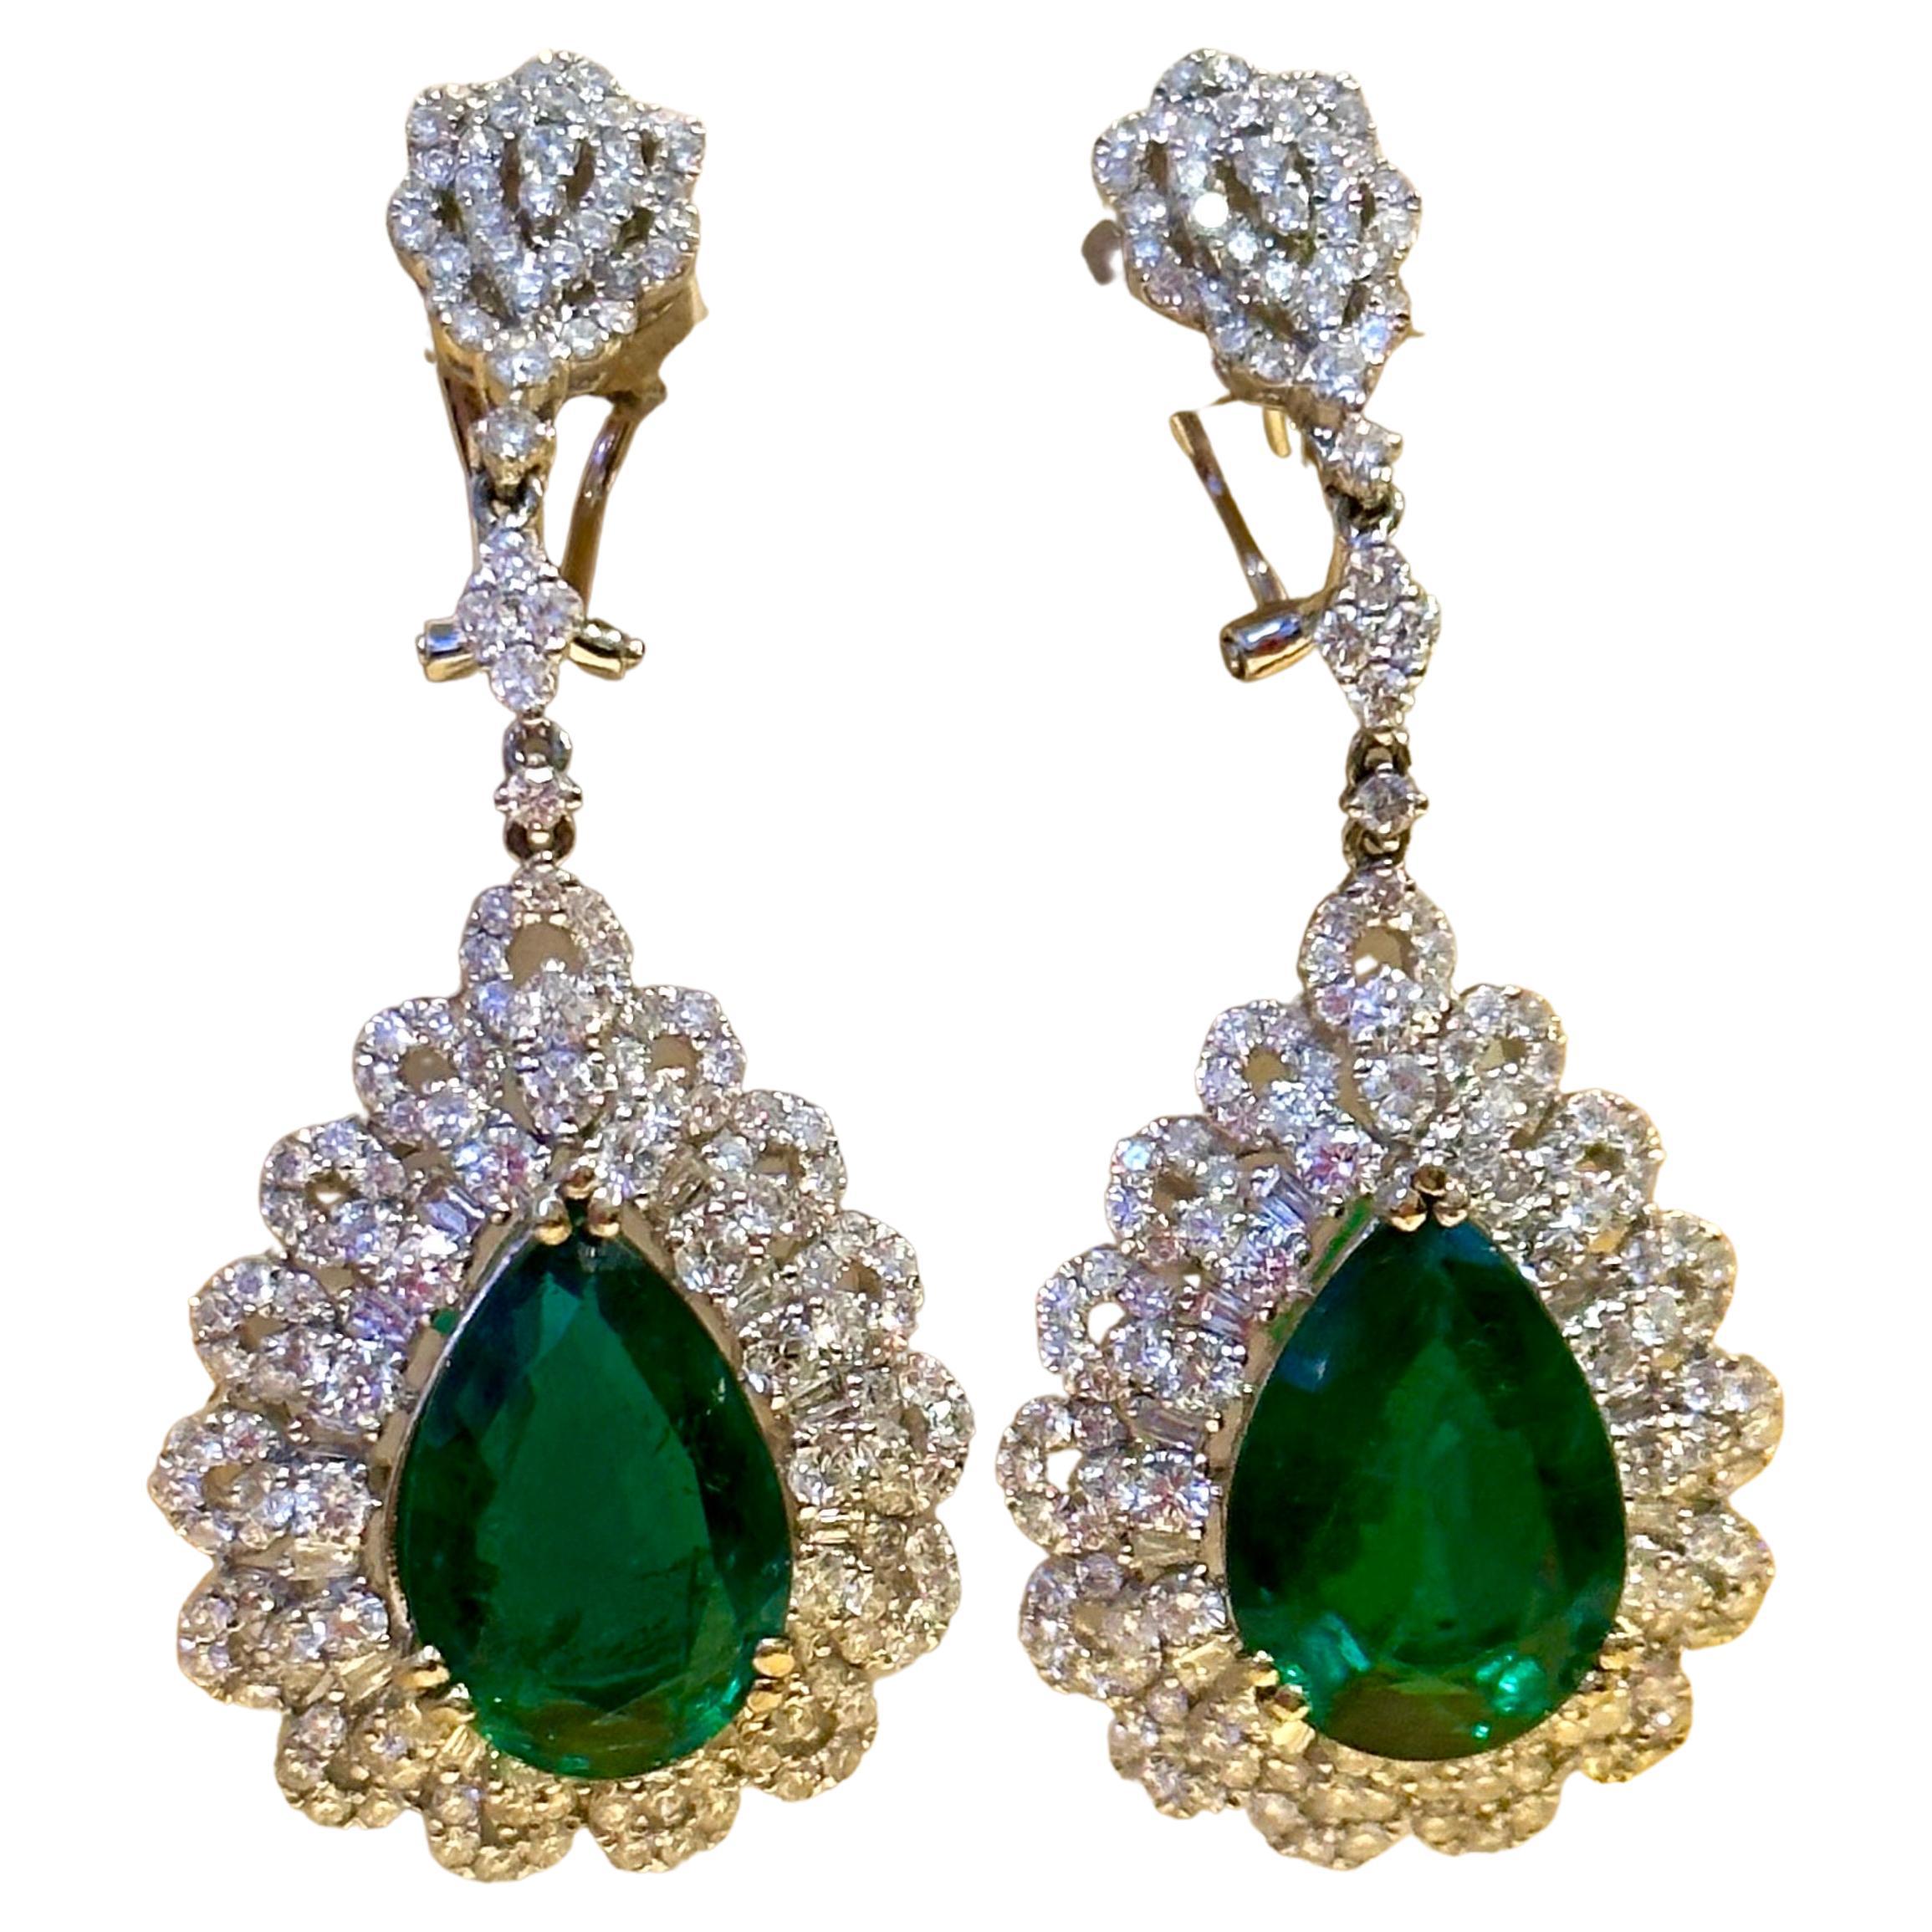 GIA Report # 2221836477
Natural Beryl 
Origin Zambia
14 Ct Pear/Drop Zambian Emerald 7 Ct Diamond Dangling Earrings 18 Kt Gold 
These Earrings are with Perfect pair of matching emeralds and Diamond 
This exquisite pair of earrings are beautifully